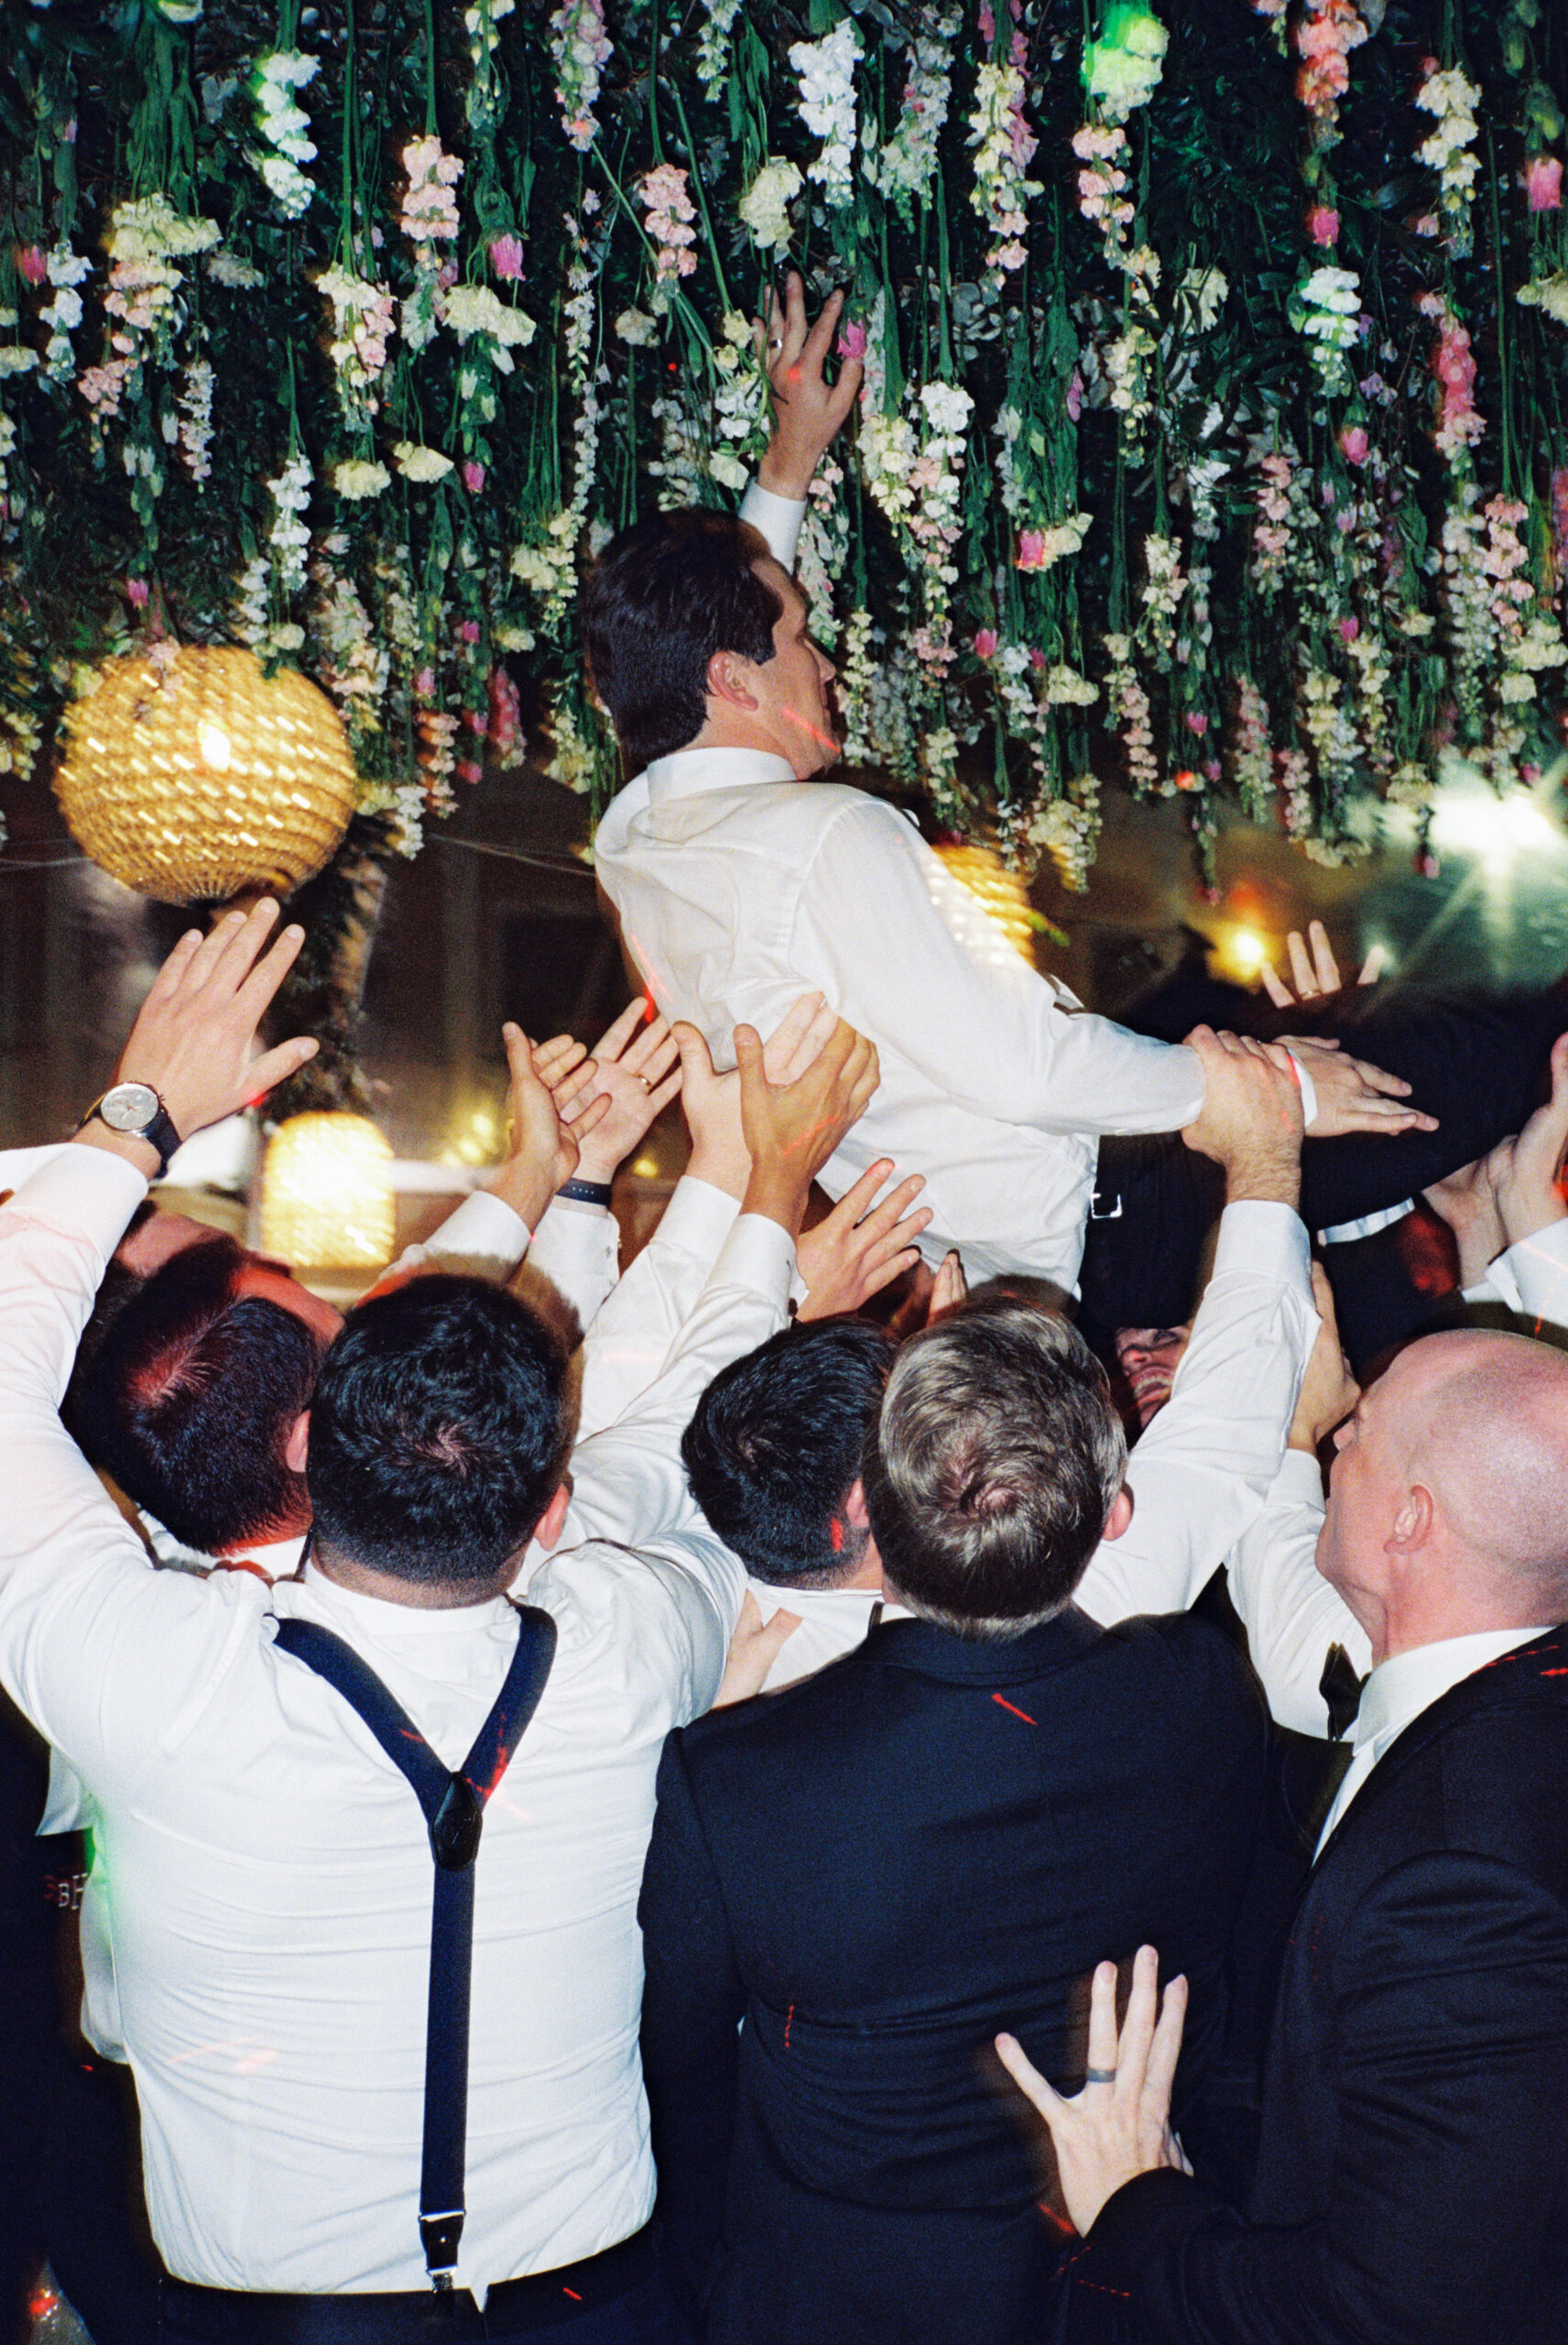 Flash film photo of groom getting carried by wedding guests.